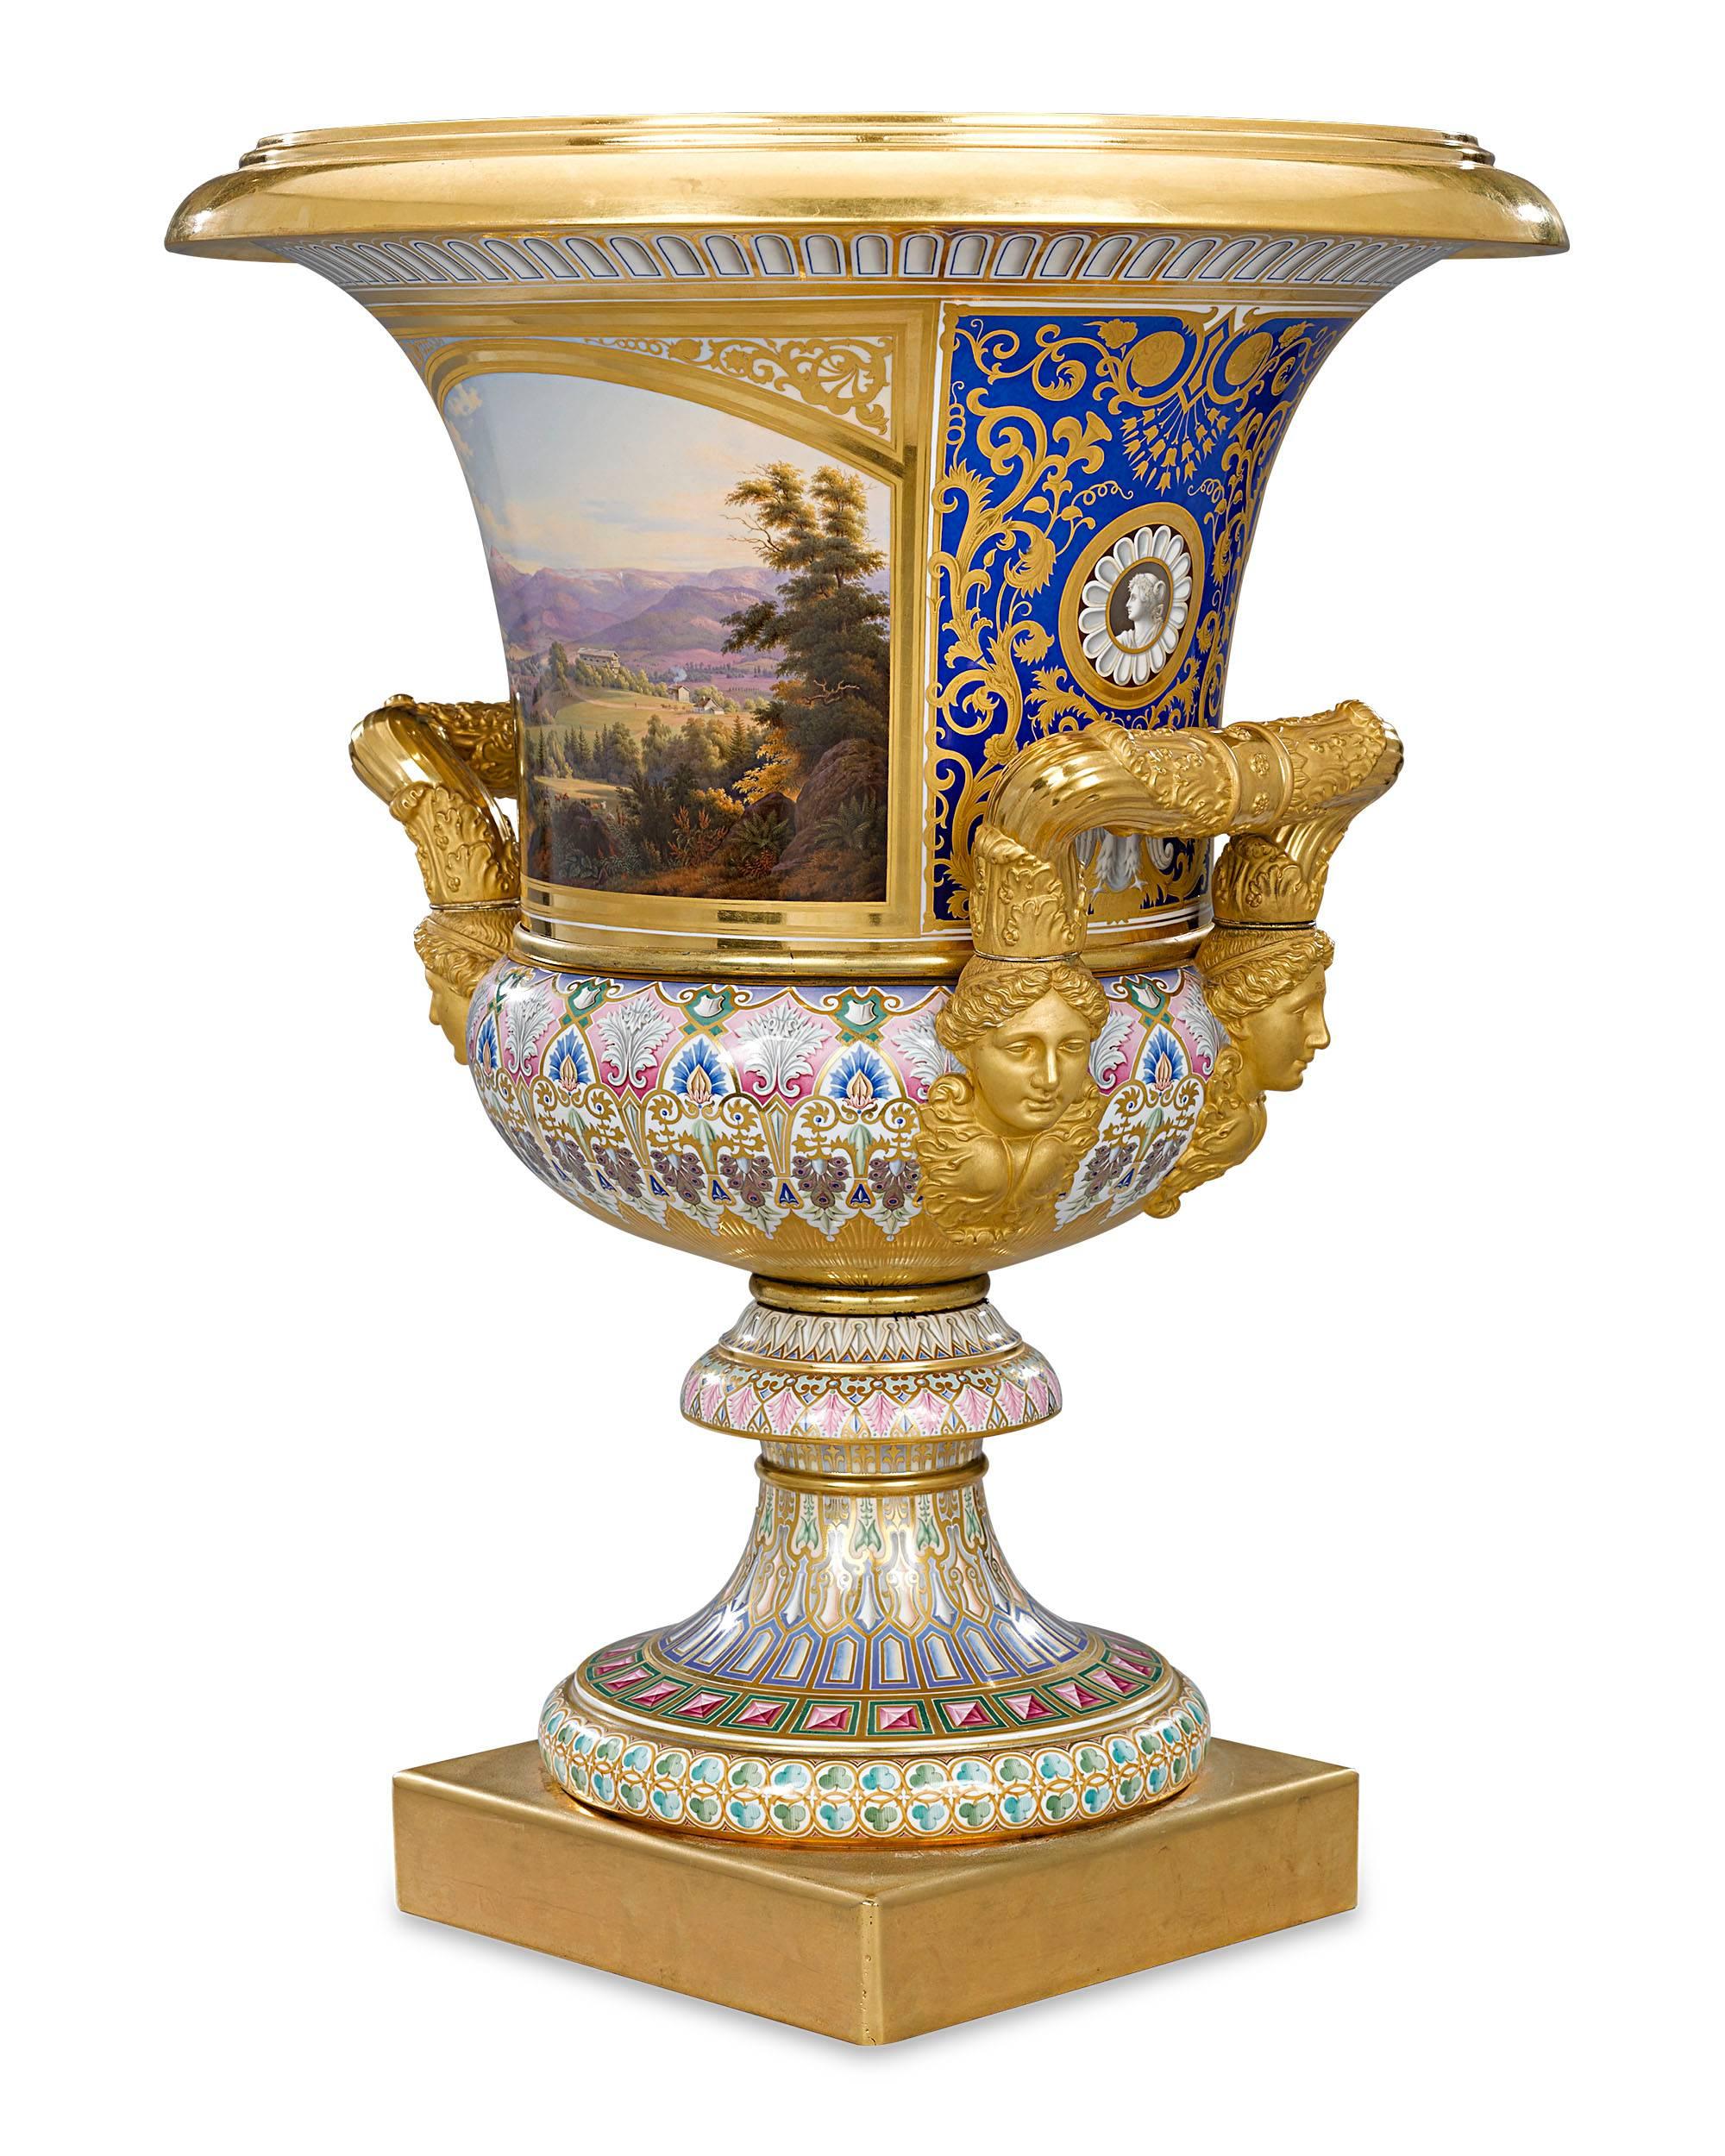 Given by King Frederick William IV of Prussia to his sister Alexandrine, the Grand Duchess of Mecklenburg-Schwerin, this exquisite krater vase by KPM Berlin has both a fascinating royal provenance and spectacular artistry. The model, based on the